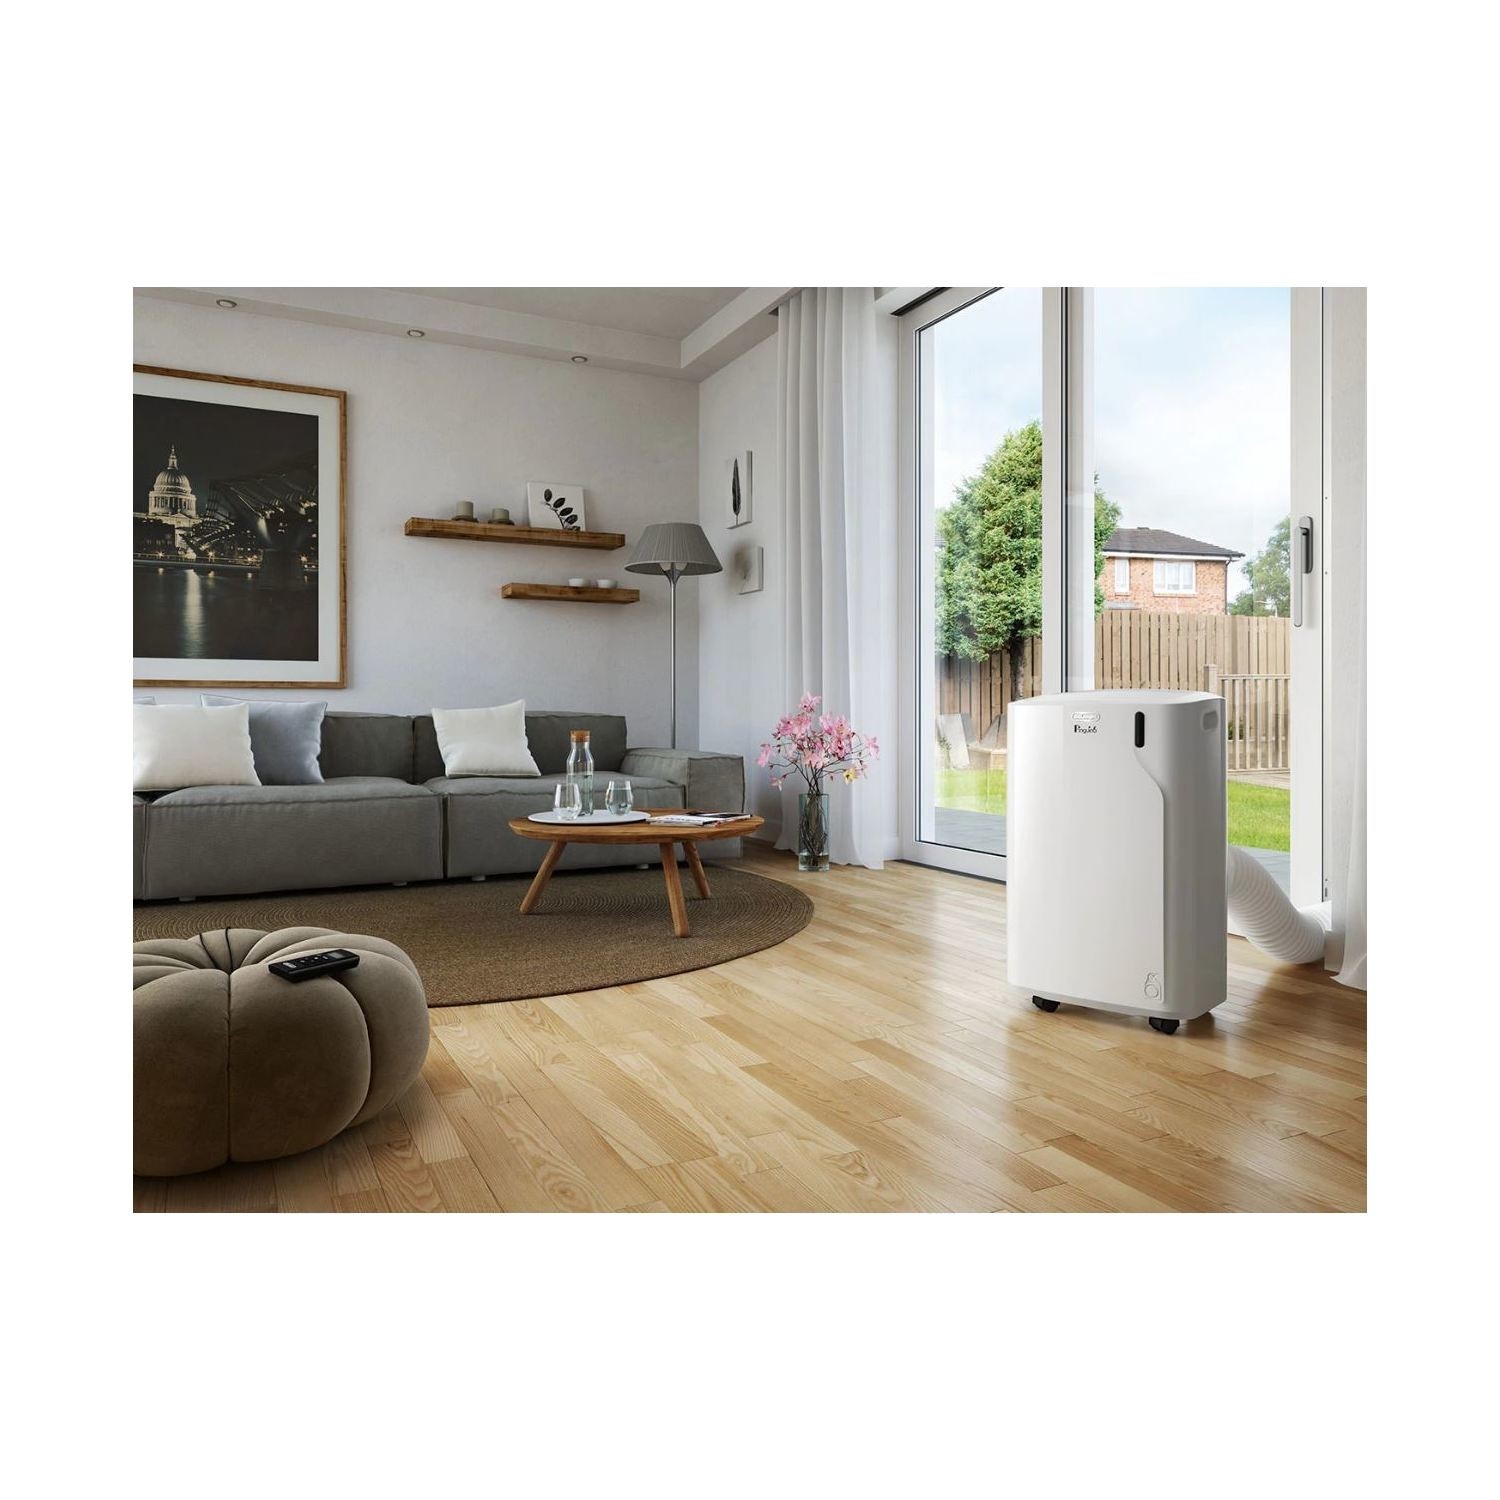 Dispensing kill profile Buy DeLonghi Pinguino PAC EM77 / N77 ECO 9000 BTU Portable Air Conditioner  for rooms up to 25 sqm from Aircon Direct